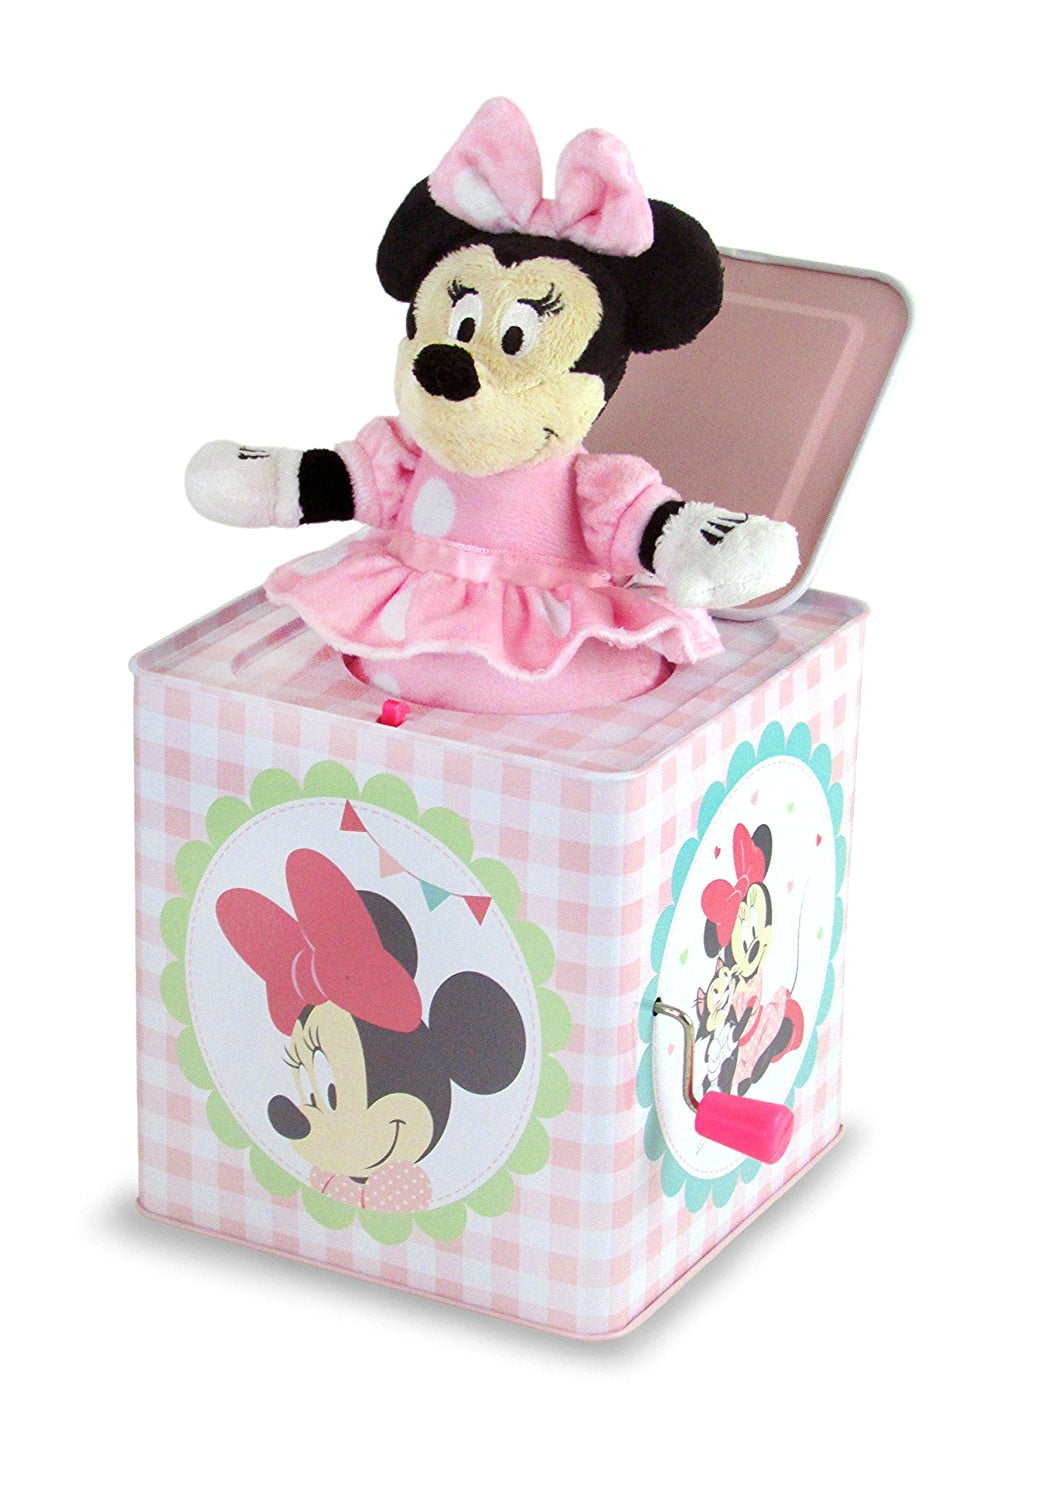 Disney Baby Minnie Mouse Jack-in-the-Box - Walmart.com